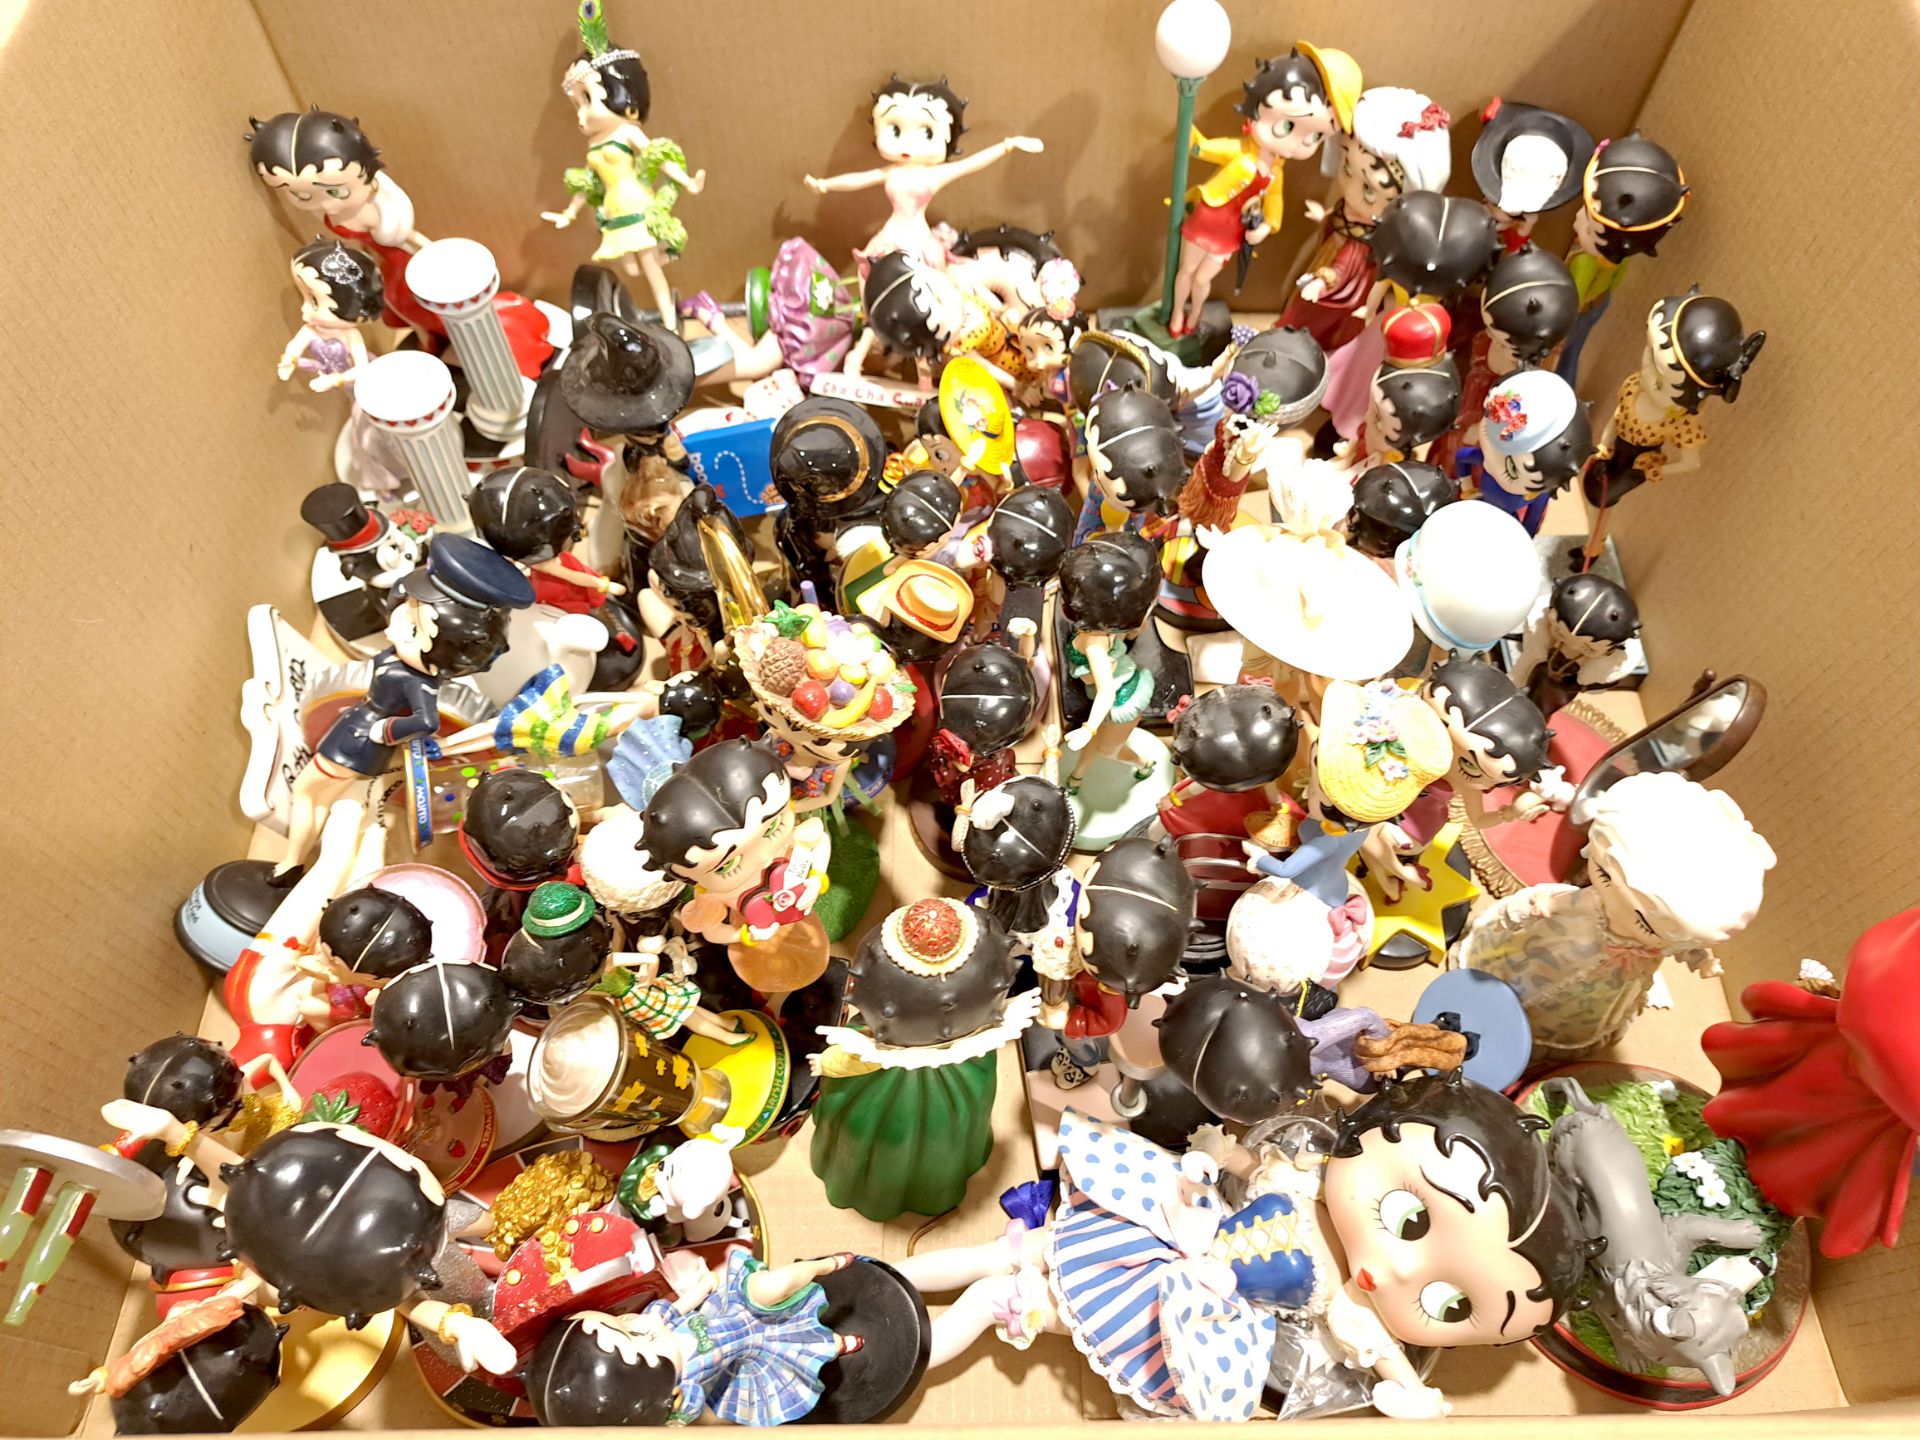 Quantity of Small Betty Boop Figurines